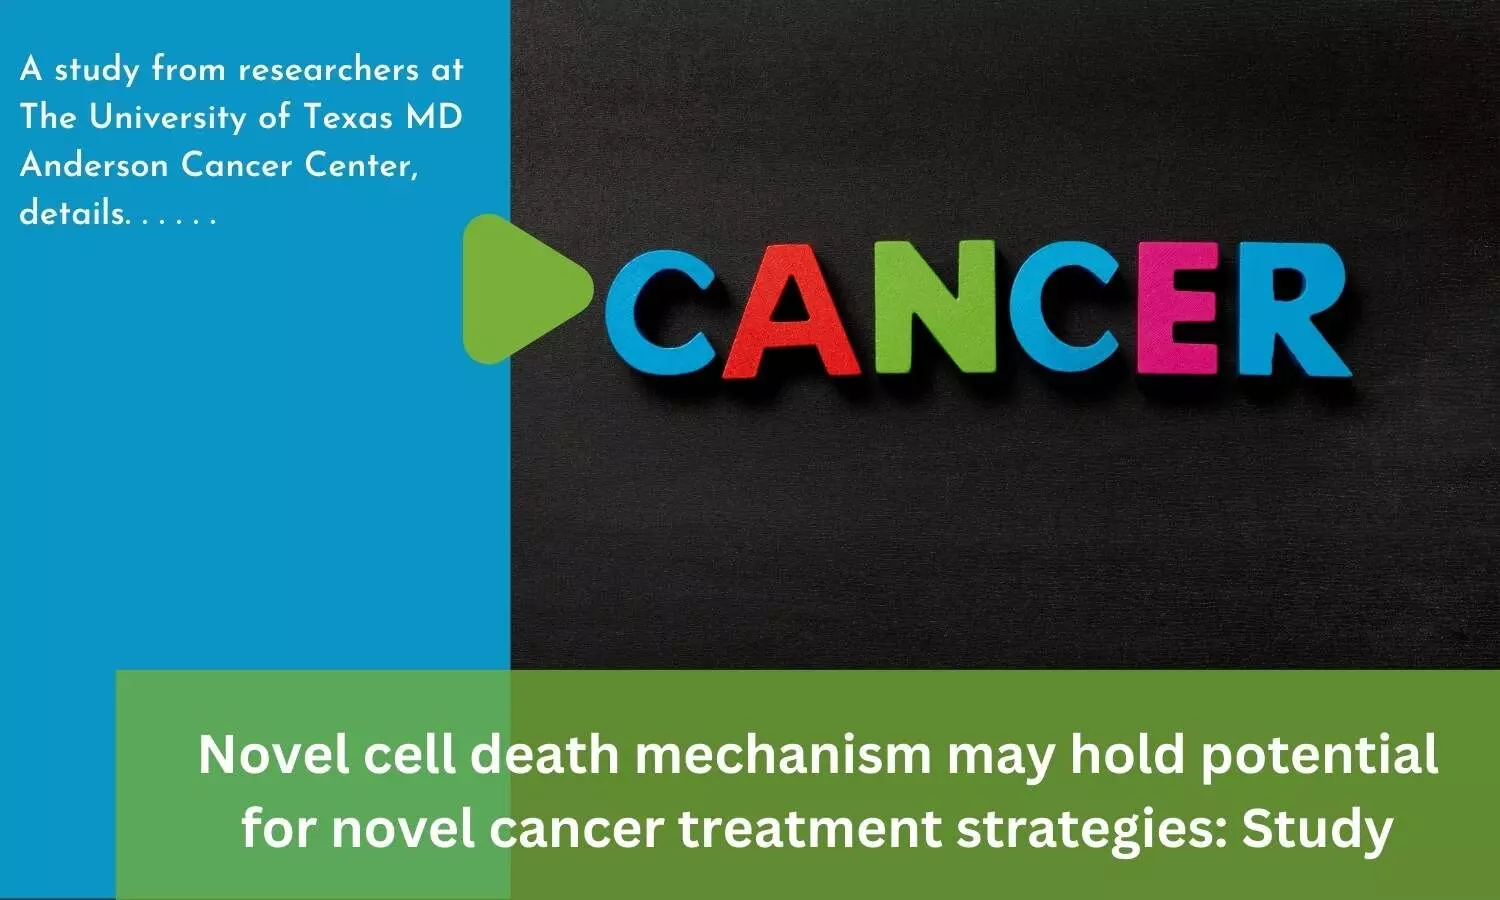 Novel cell death mechanism may hold potential for novel cancer treatment strategies: Study